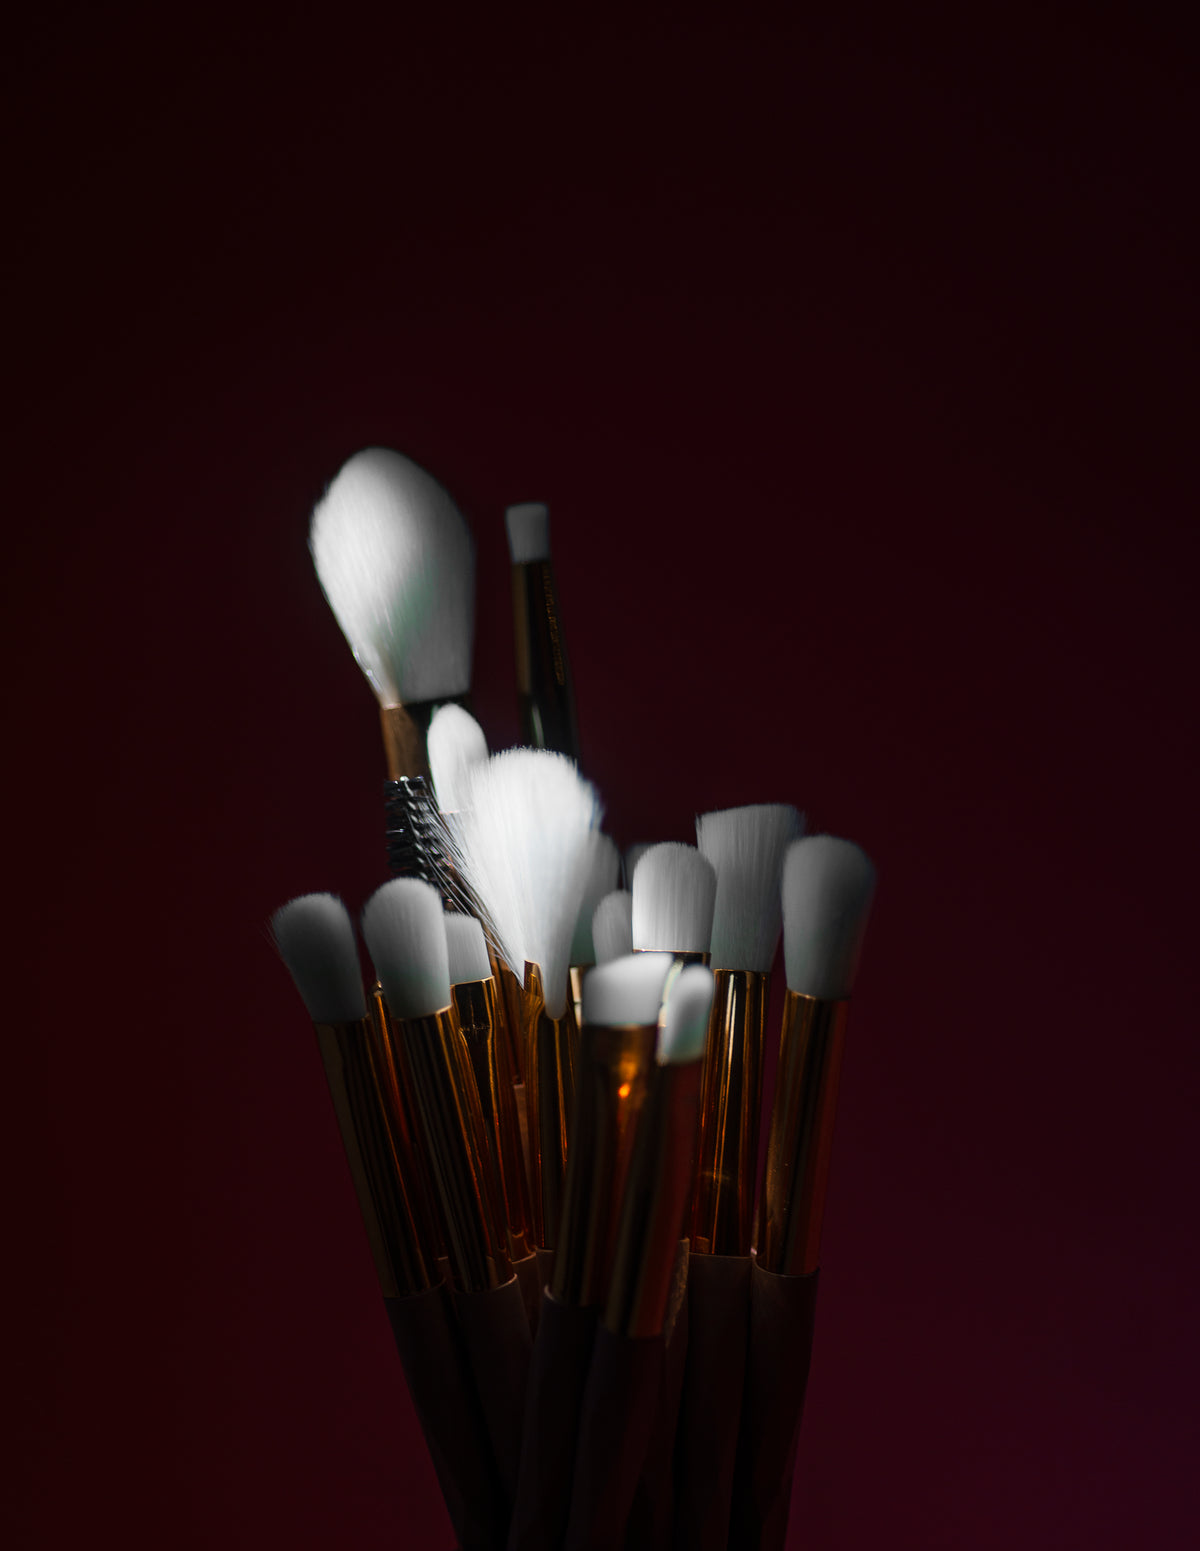 makeup brushes against deep red background